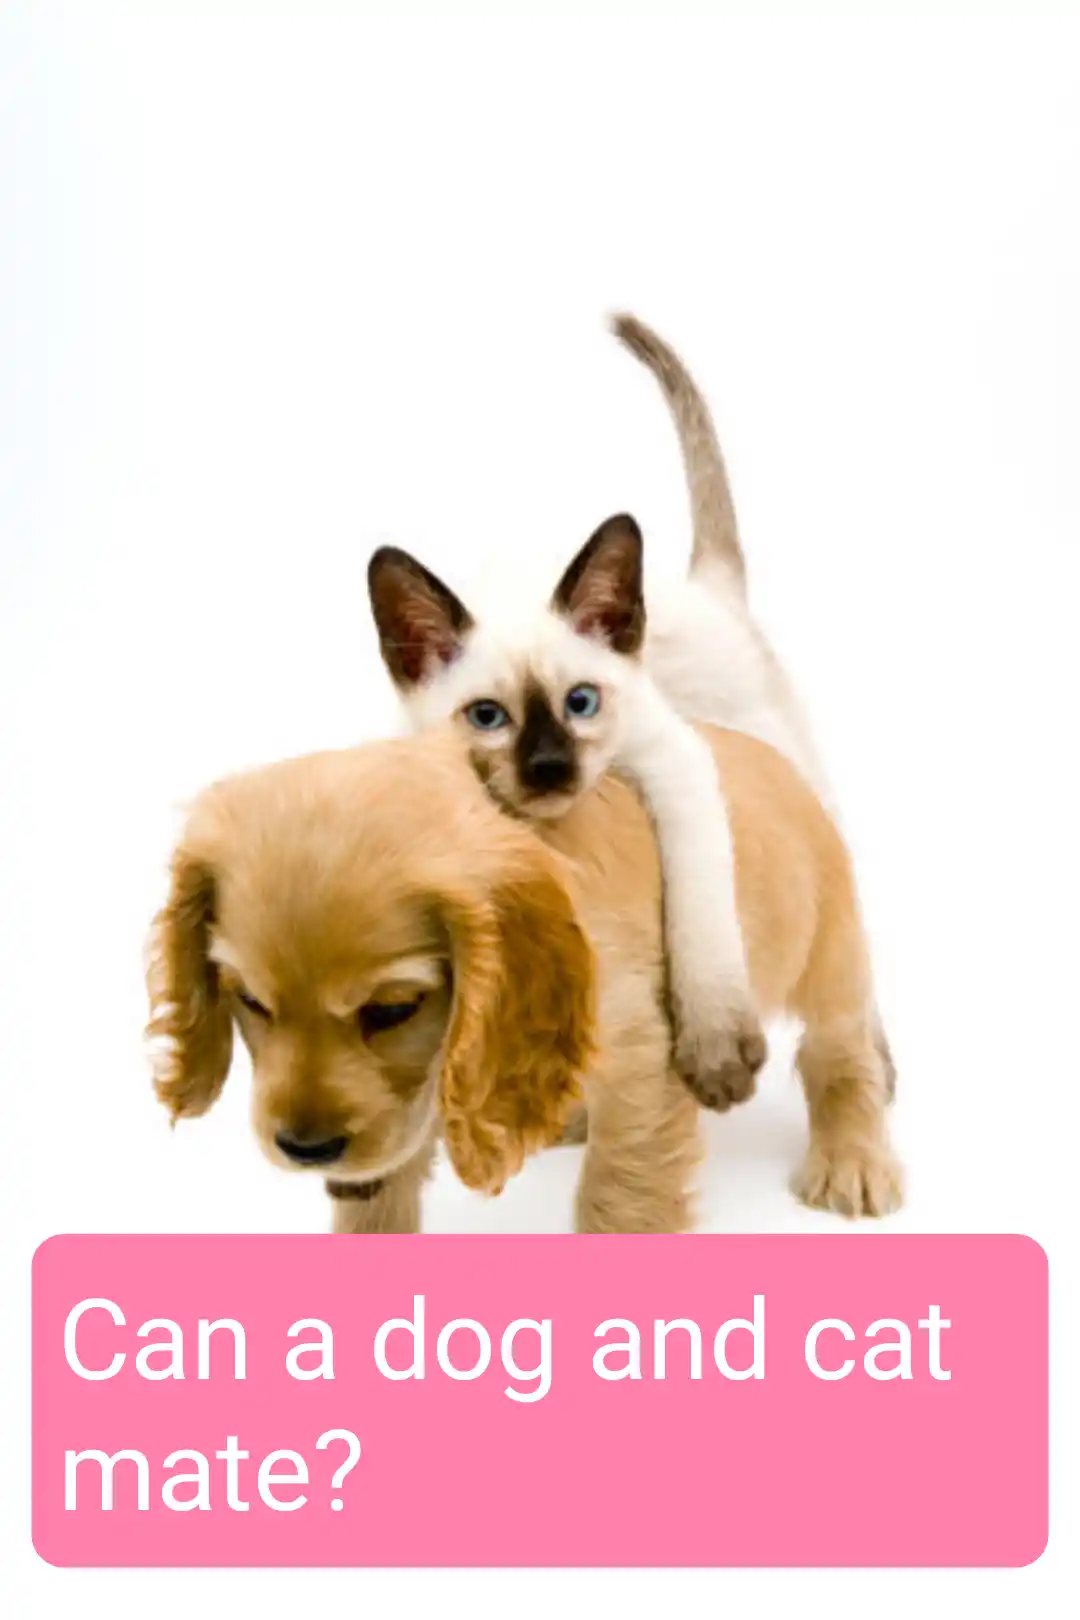 Can A Cat And Dog Mate?